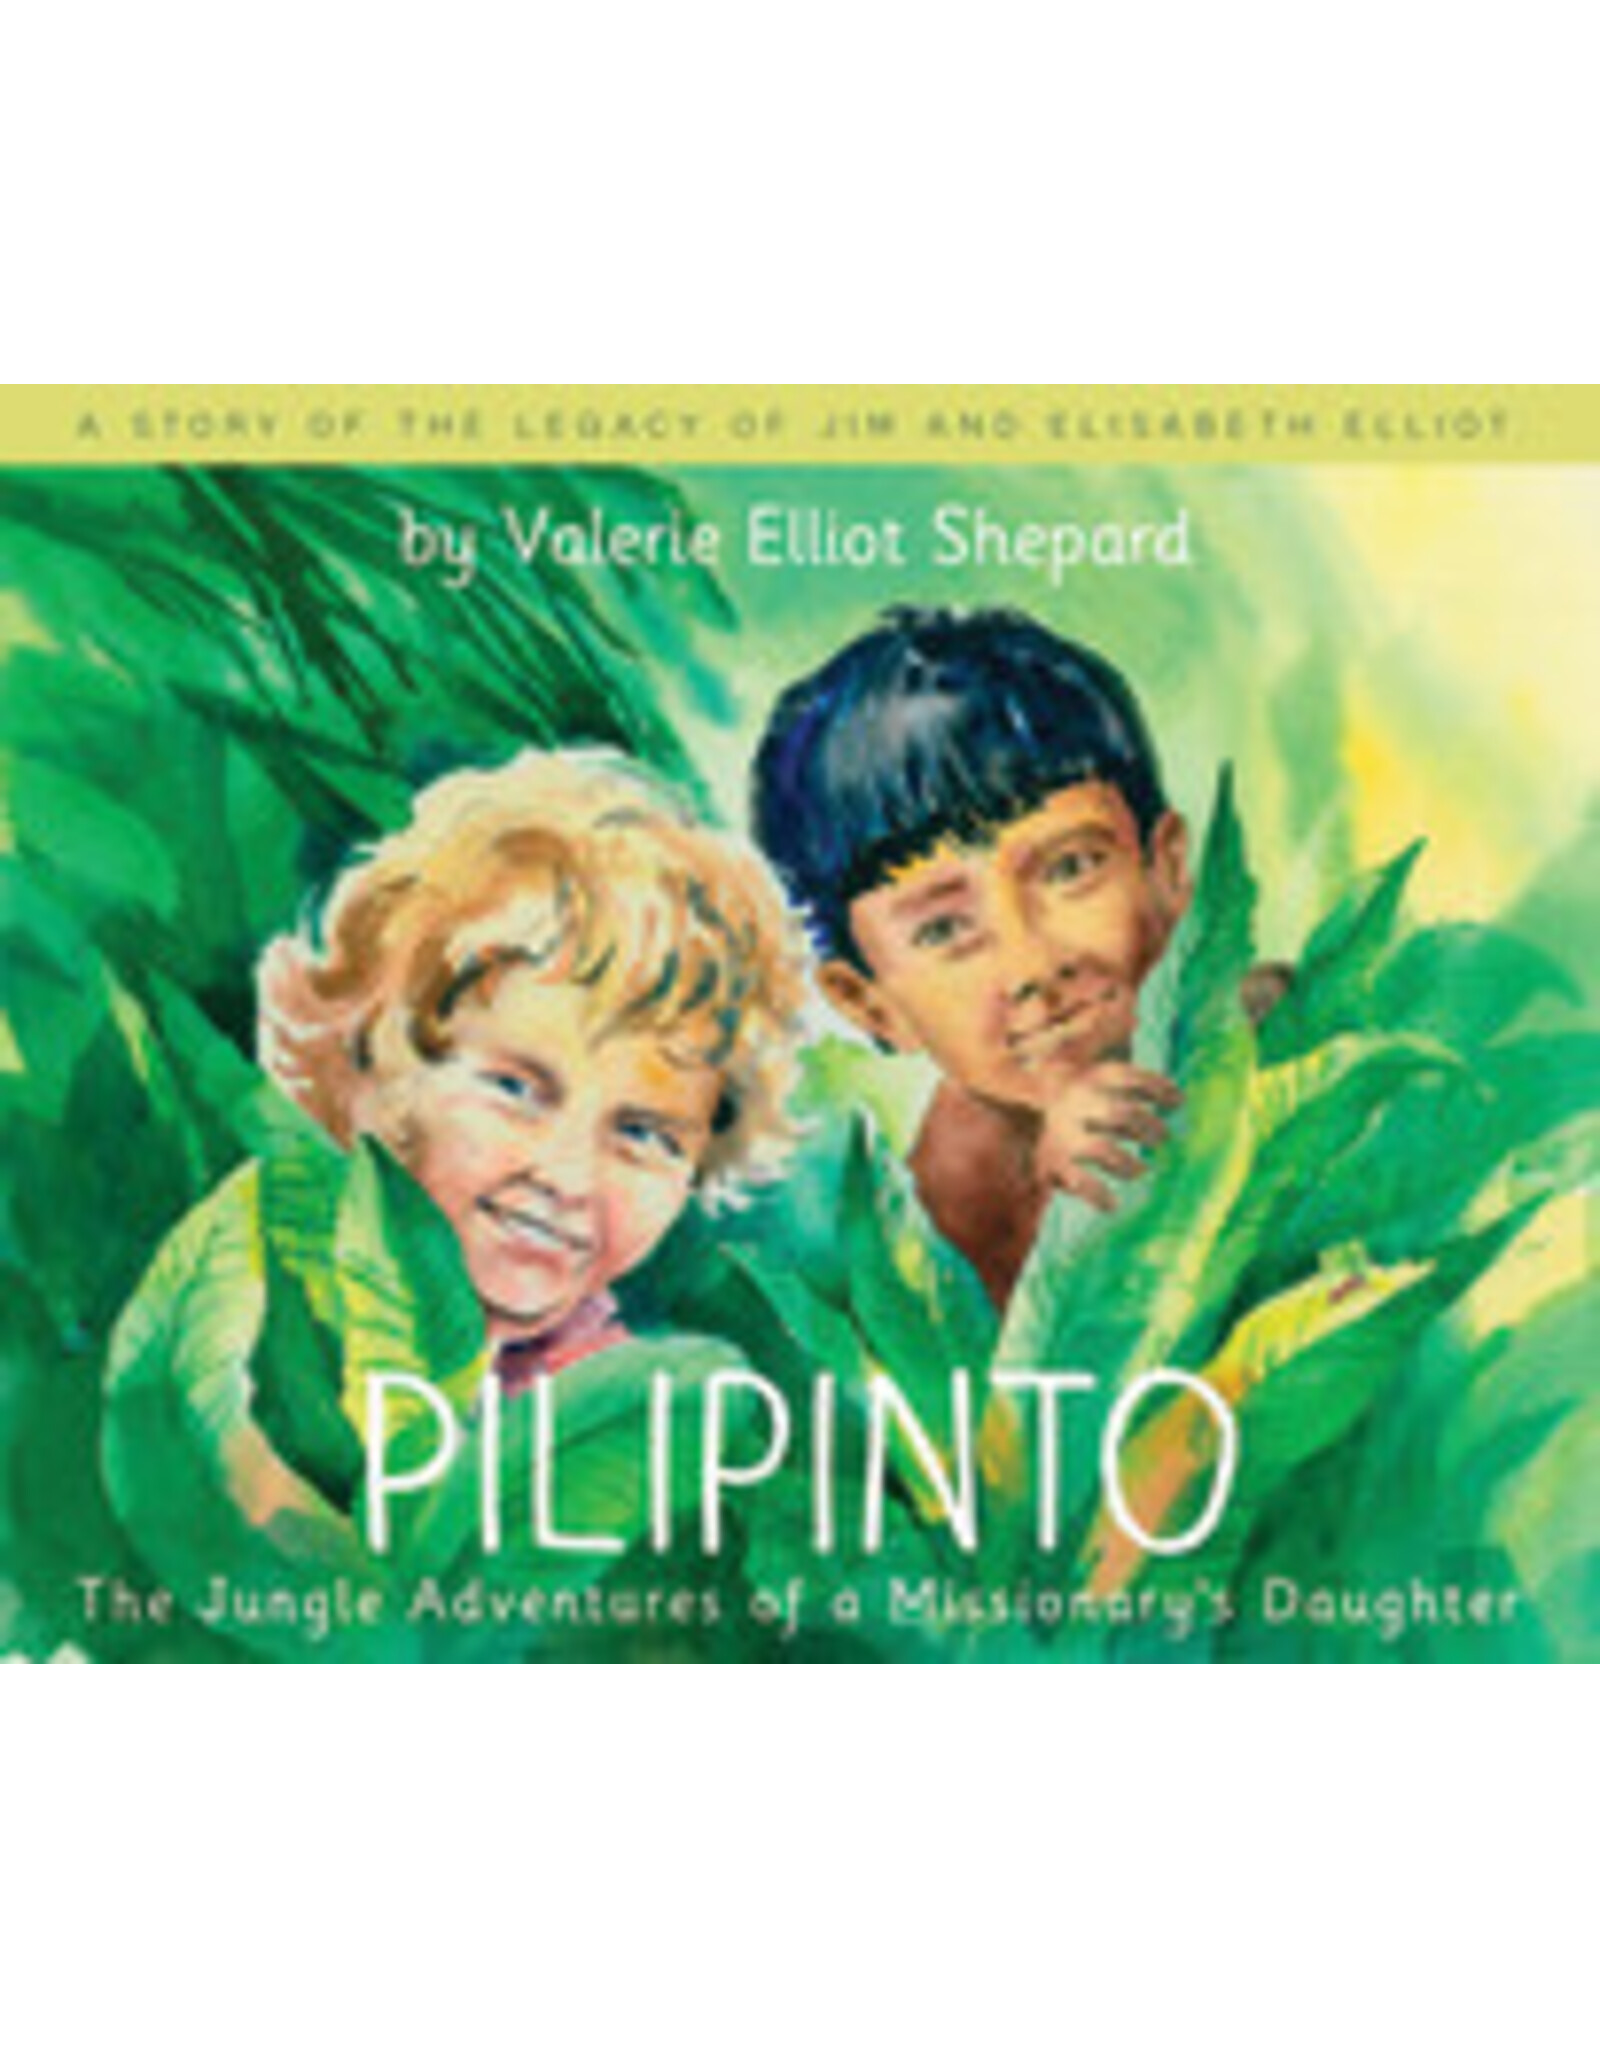 Valerie Elliot Shepard Pilipinto - The Jungle Adventures of a Missionary's Daughter